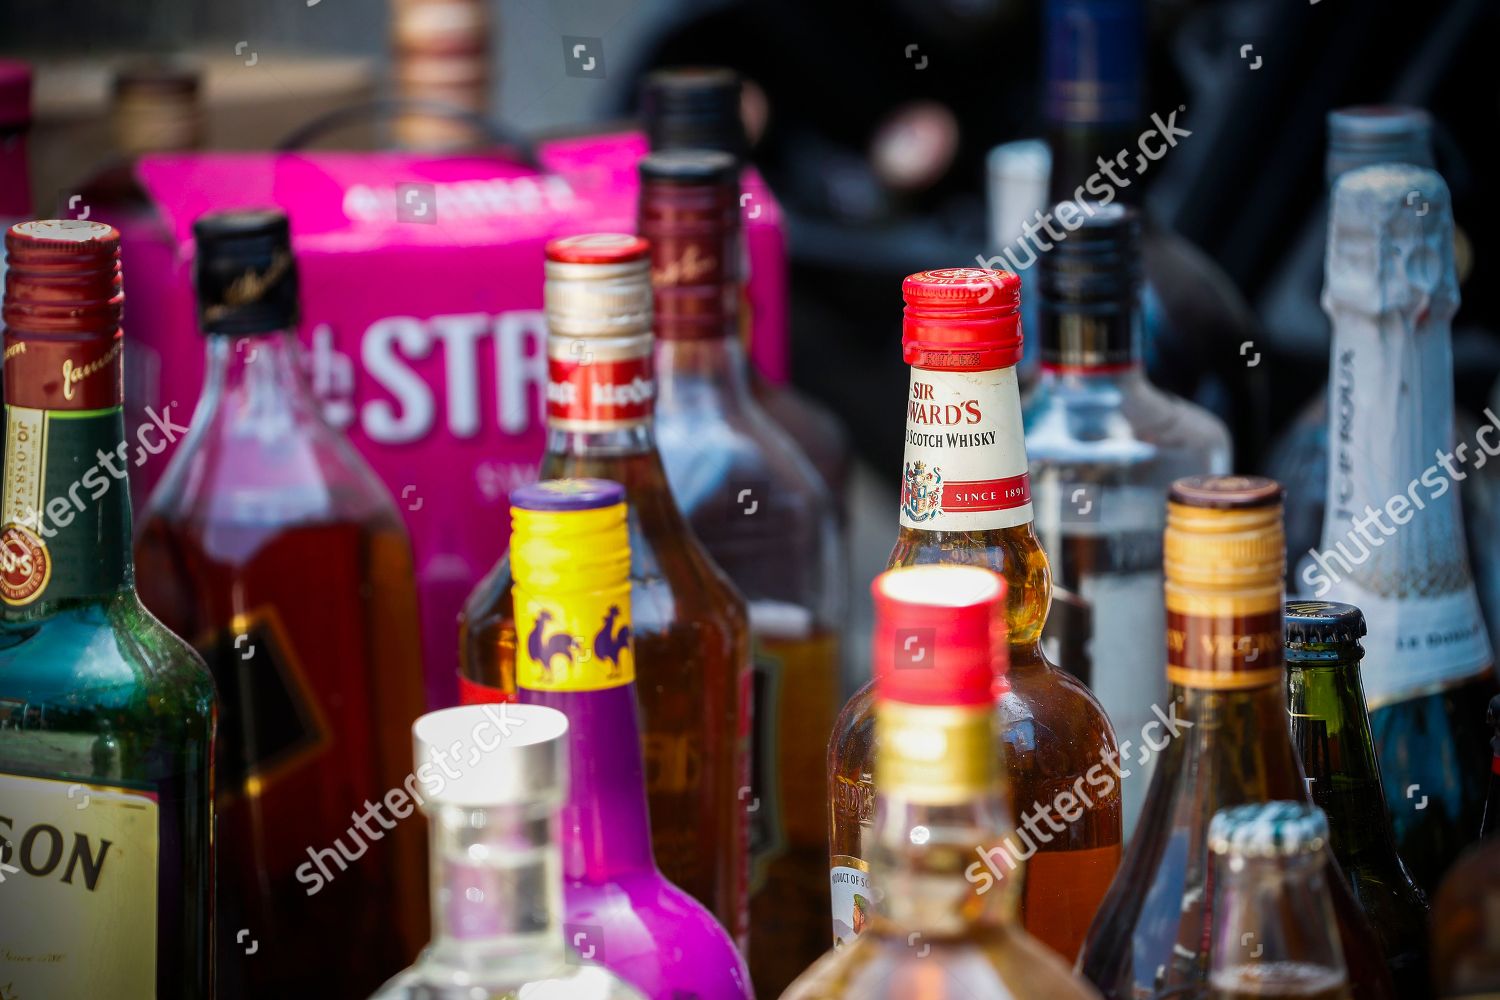 Some 16926 bottles alcohol amounting 12000 litres Editorial Stock Photo -  Stock Image | Shutterstock